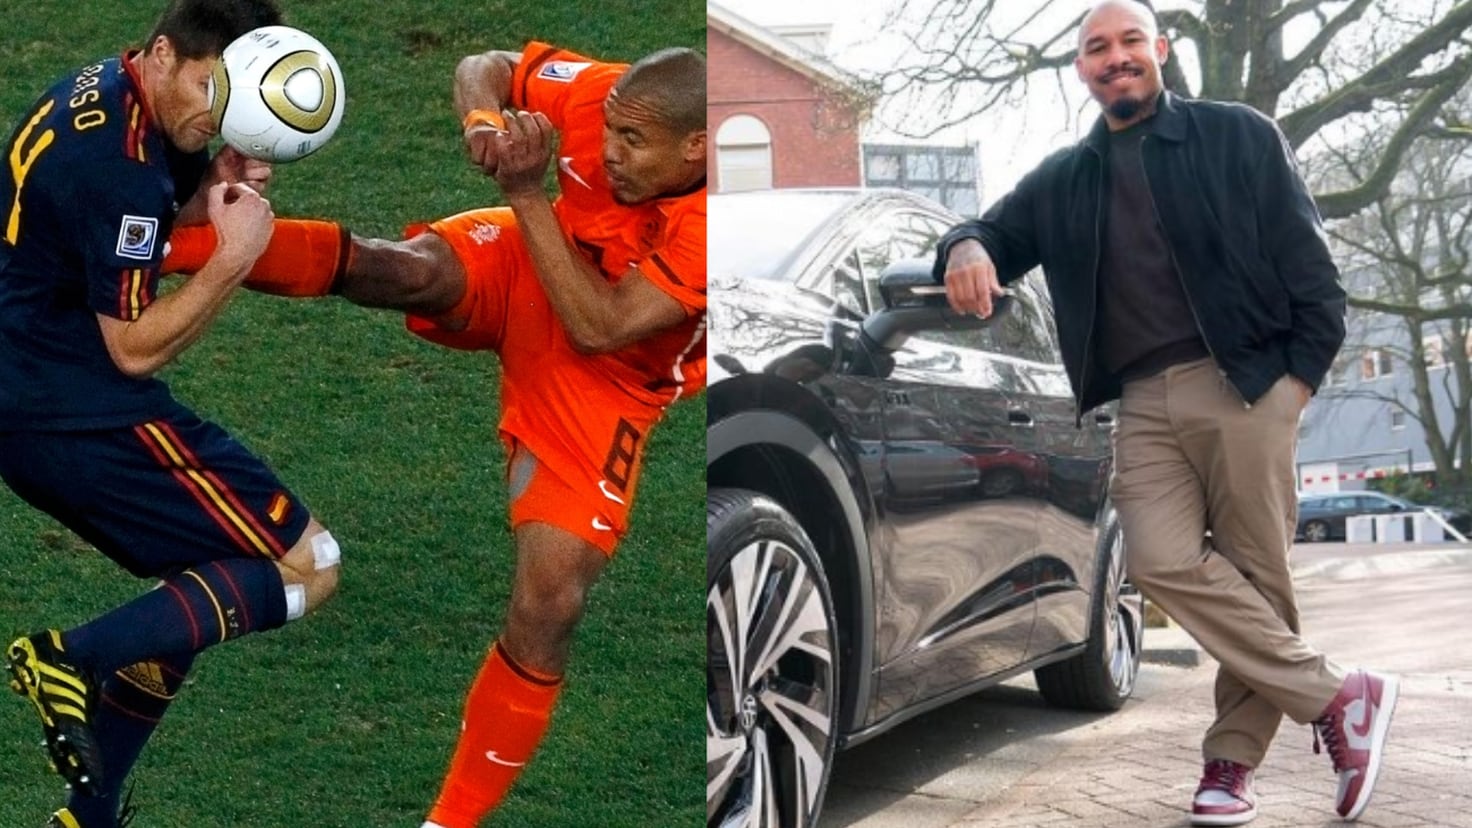 De Jong's new life: from kicking Xabi Alonso to selling luxury cars to celebrities
